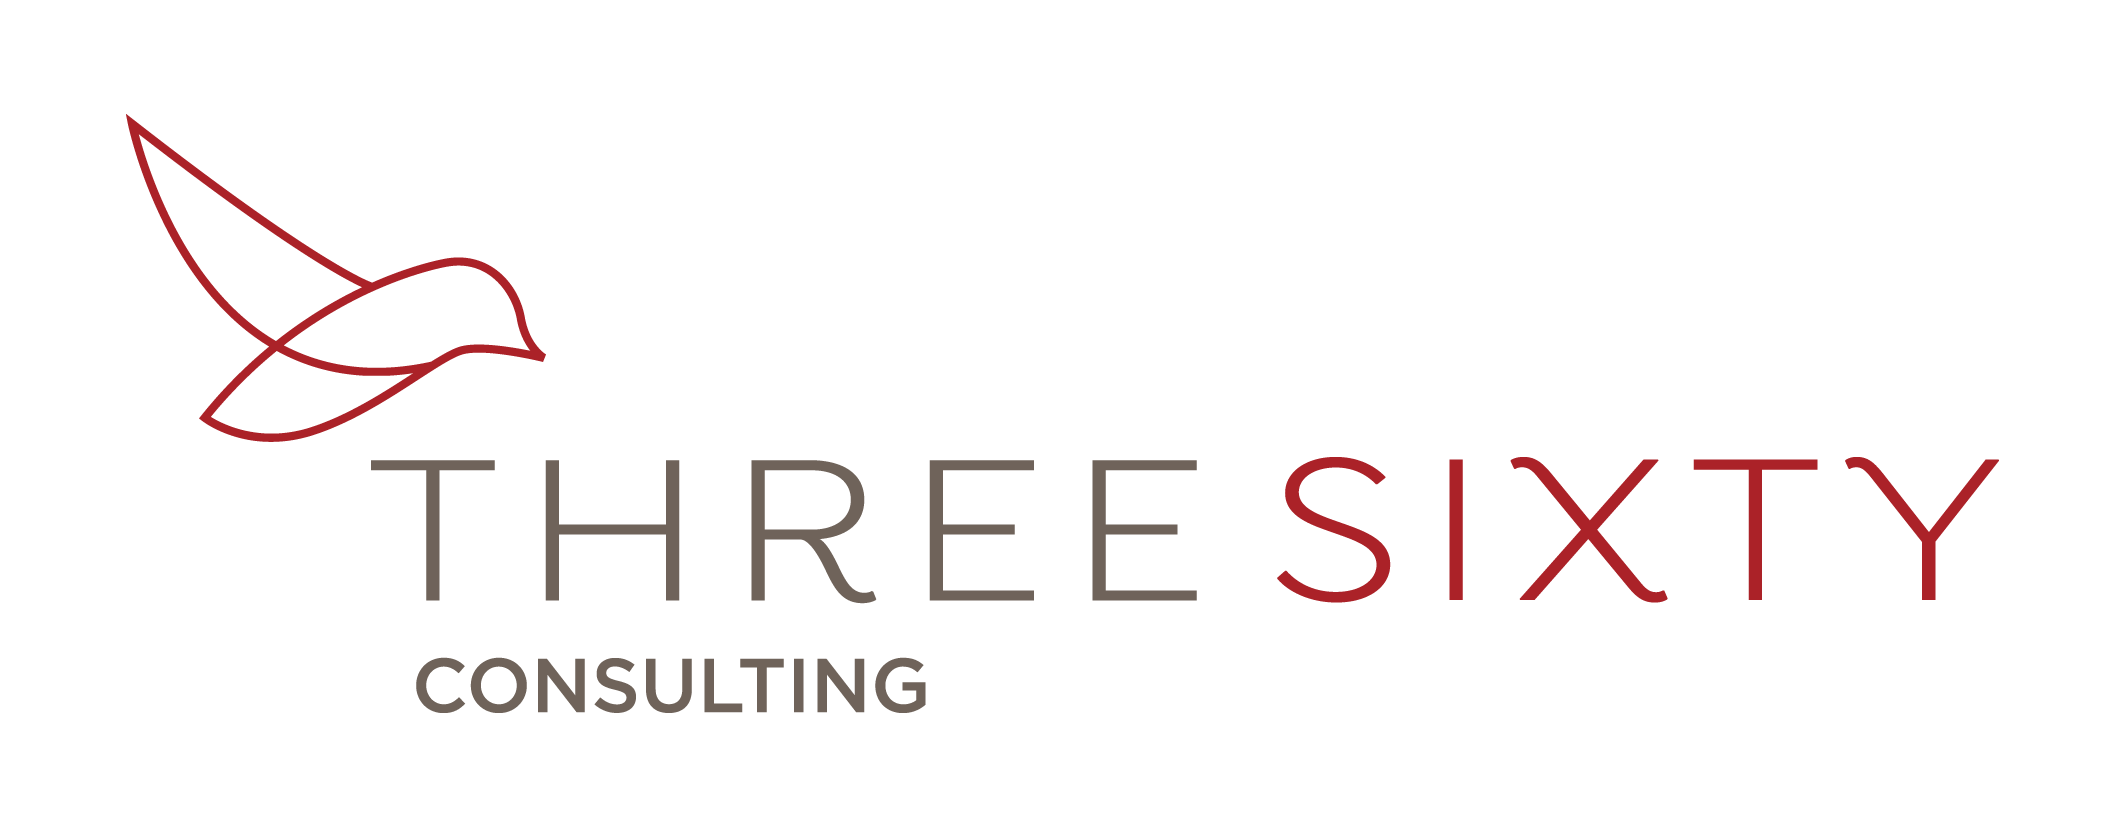 Three Sixty Consulting